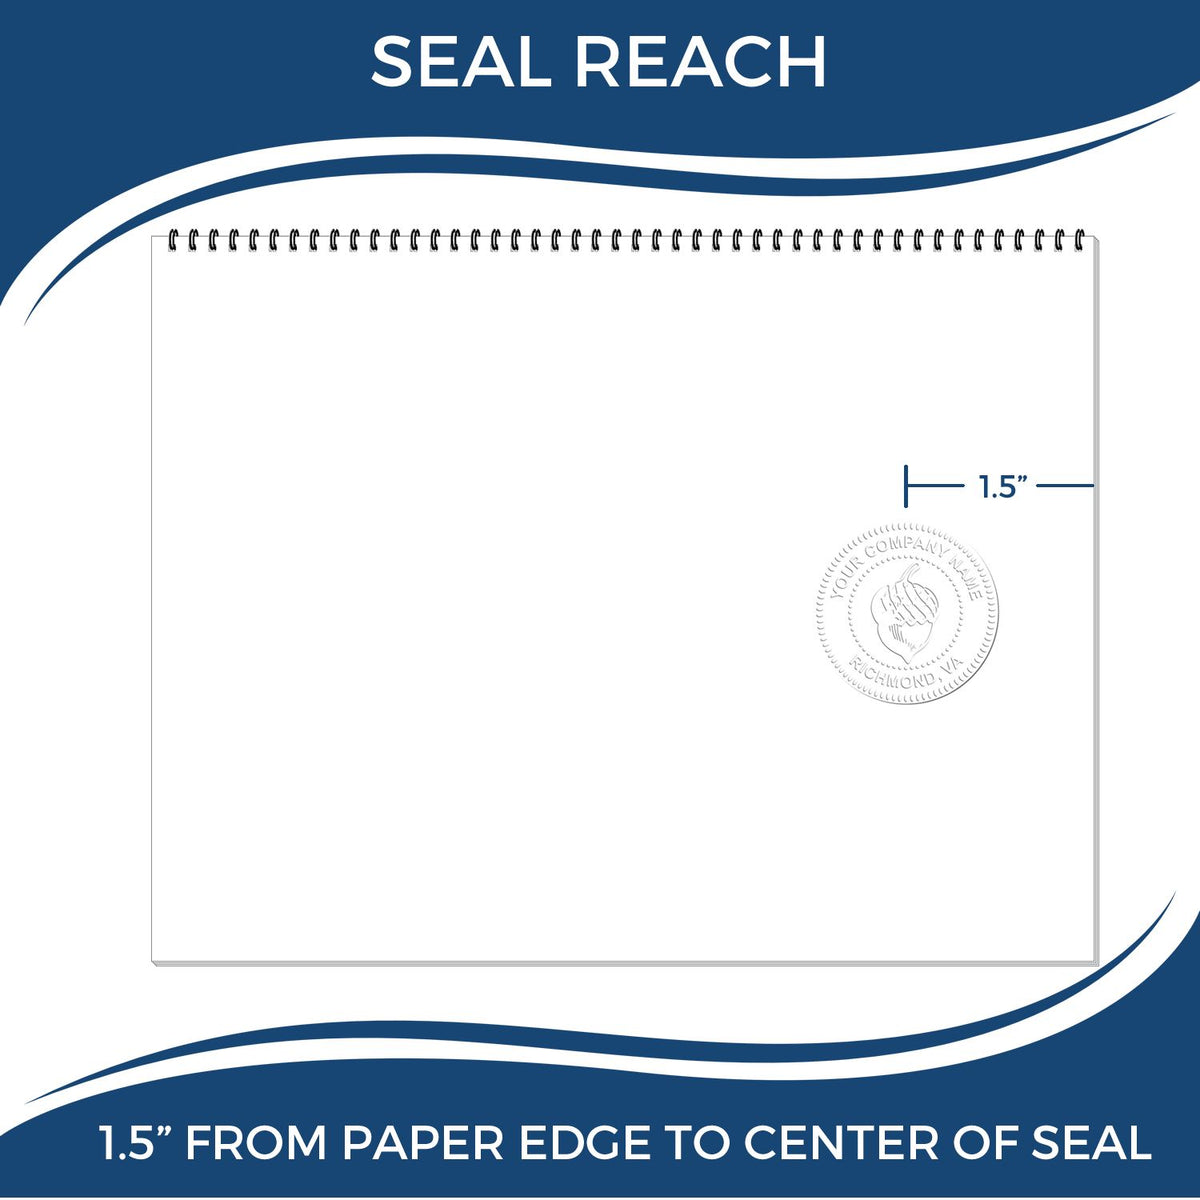 An infographic showing the seal reach which is represented by a ruler and a miniature seal image of the Soft Mississippi Professional Engineer Seal